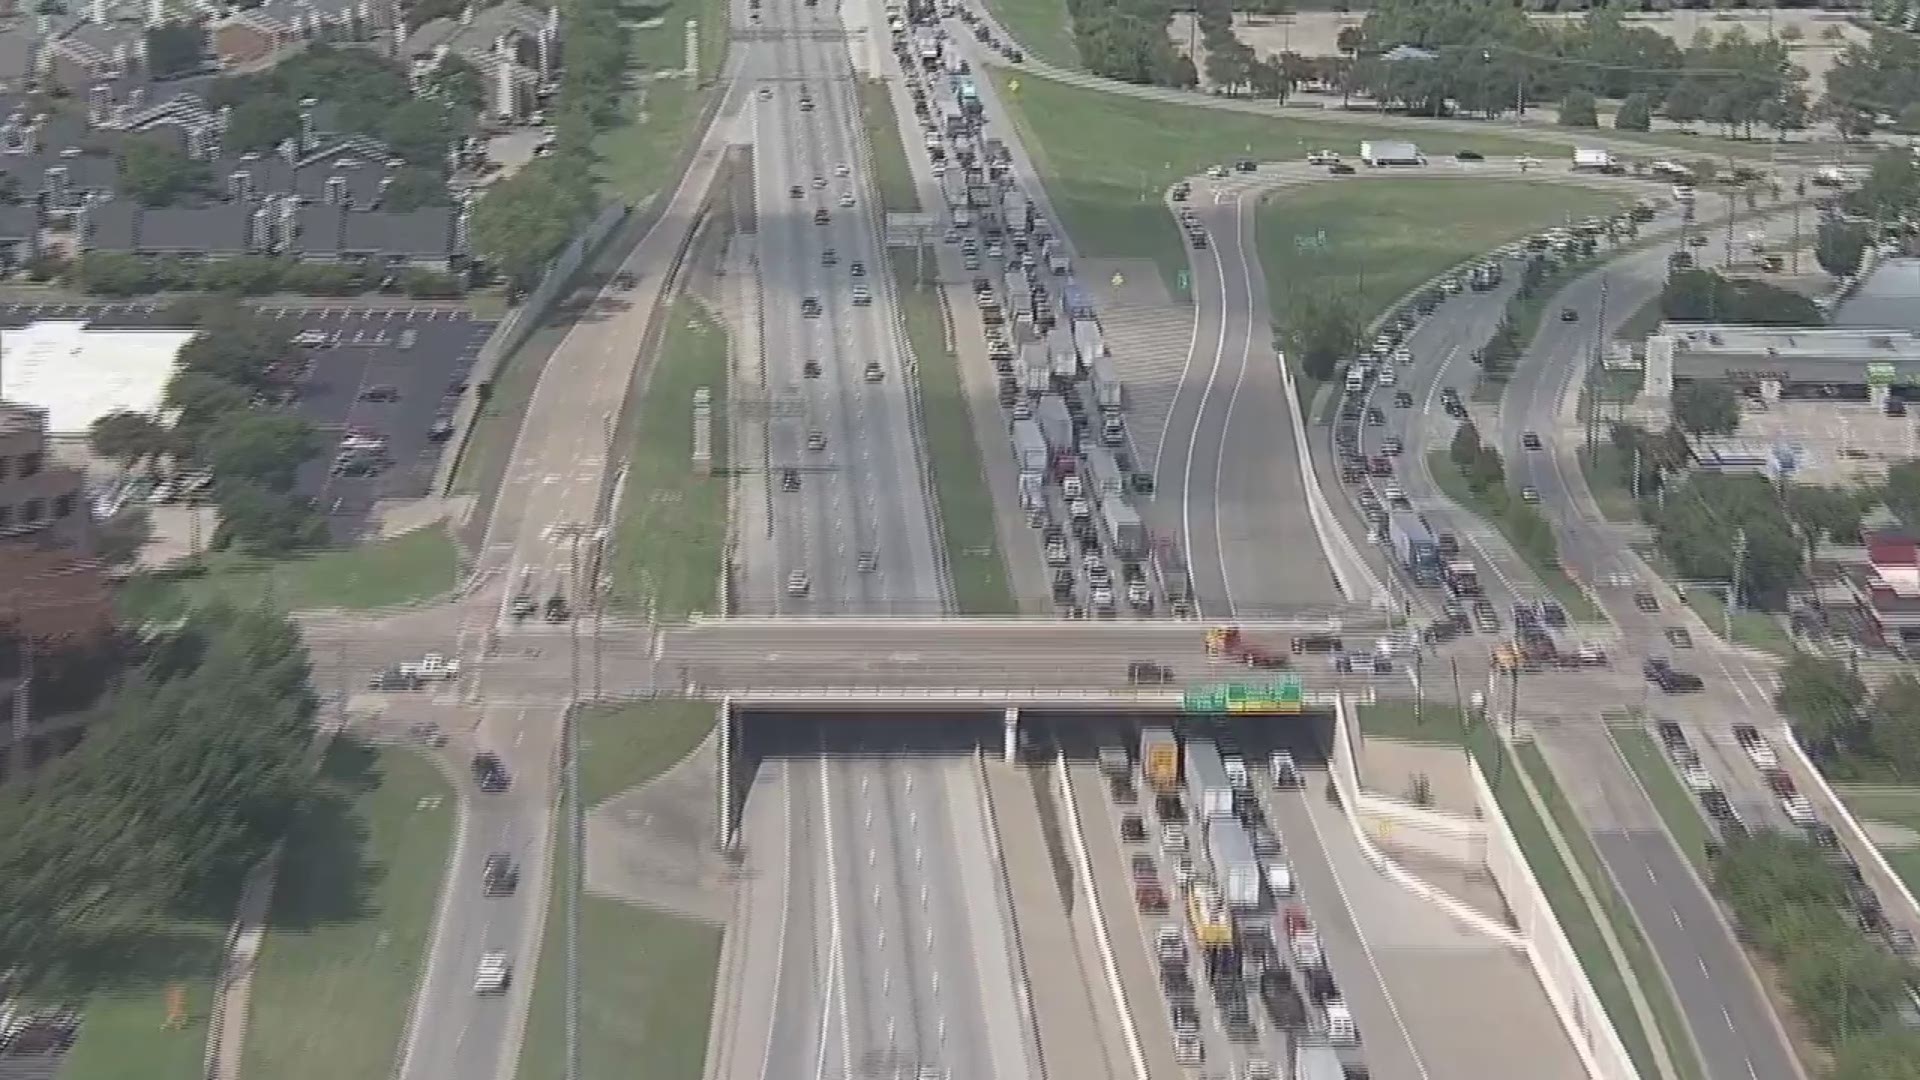 HD Chopper 8 captured aerial images of a traffic backup following an 18-wheeler hitting an overpass at Randol Mill Road.